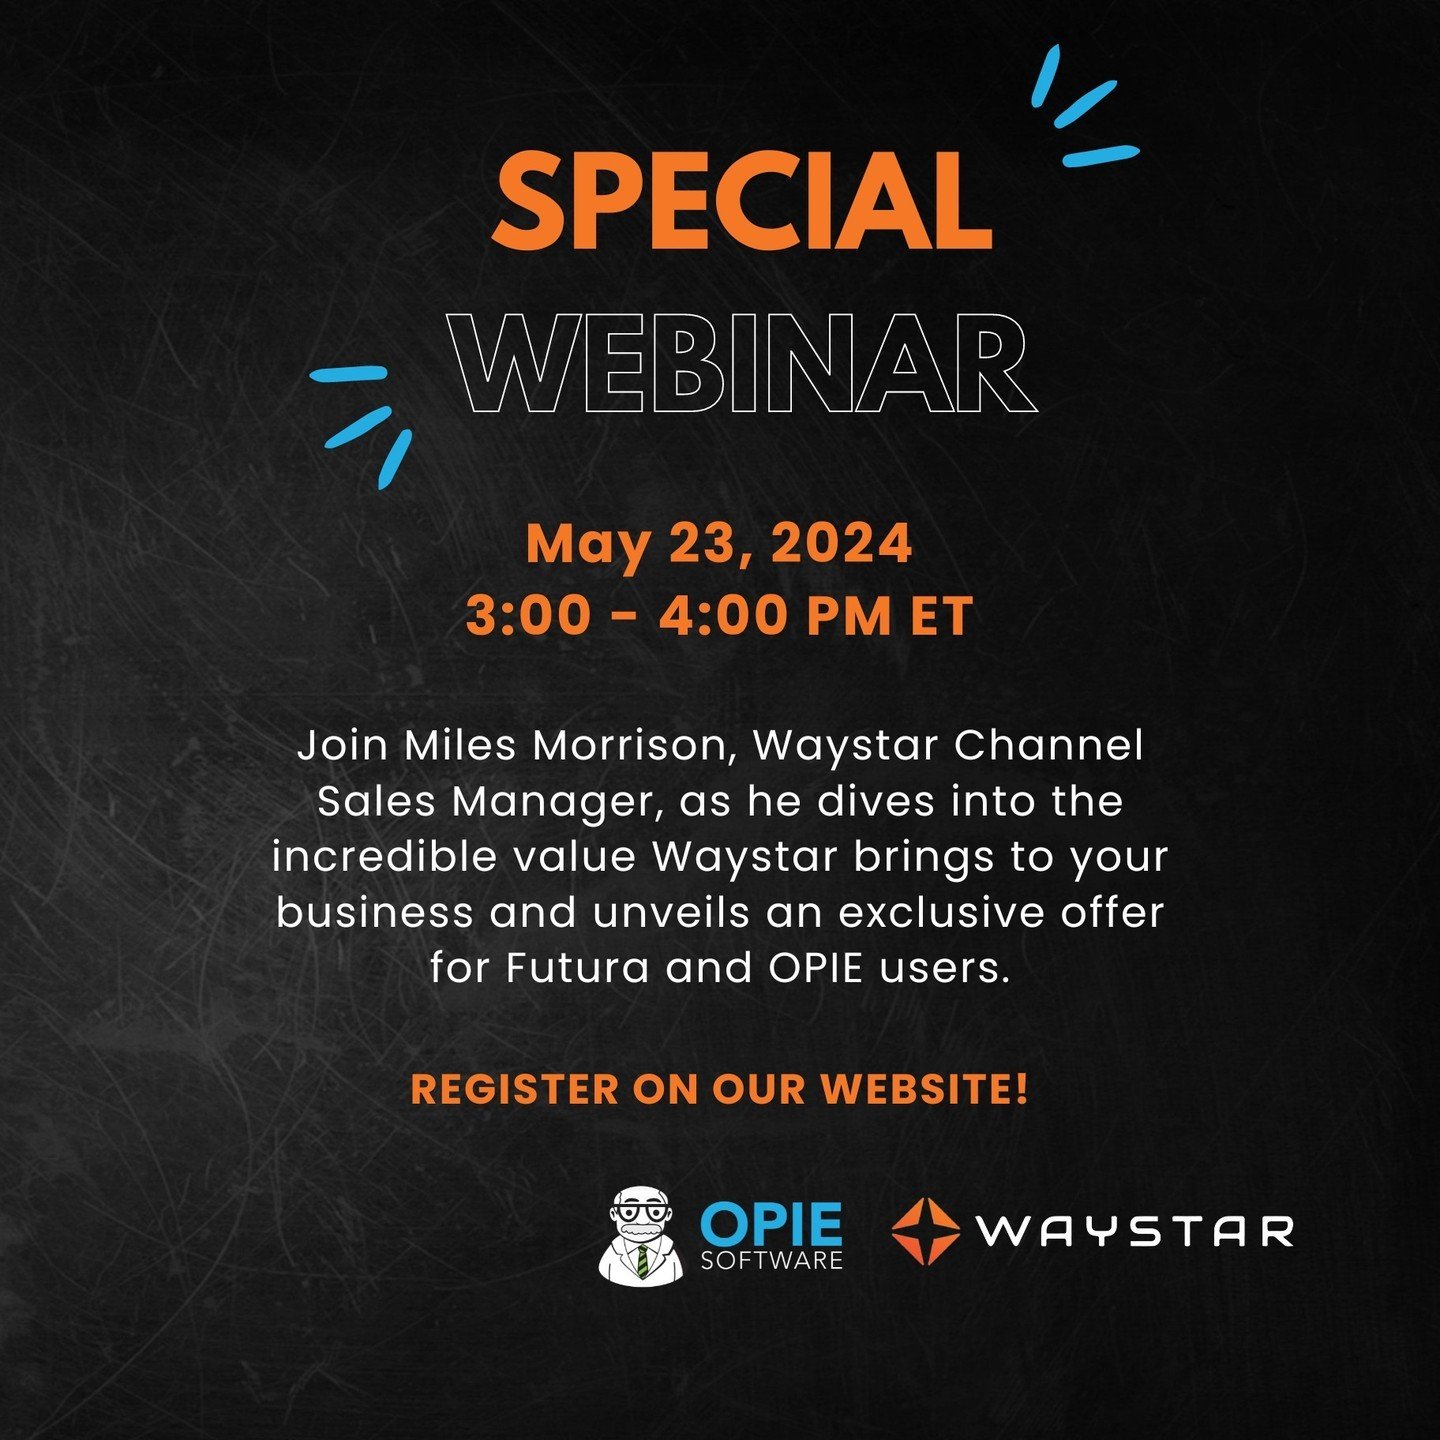 🎉 Special Offer Alert from Waystar! 🎉

Join Miles Morrison, Waystar Channel Sales Manager, this afternoon, as he dives into the incredible value Waystar brings to your business and unveils an exclusive offer for Futura and OPIE users.

✨ Discover W